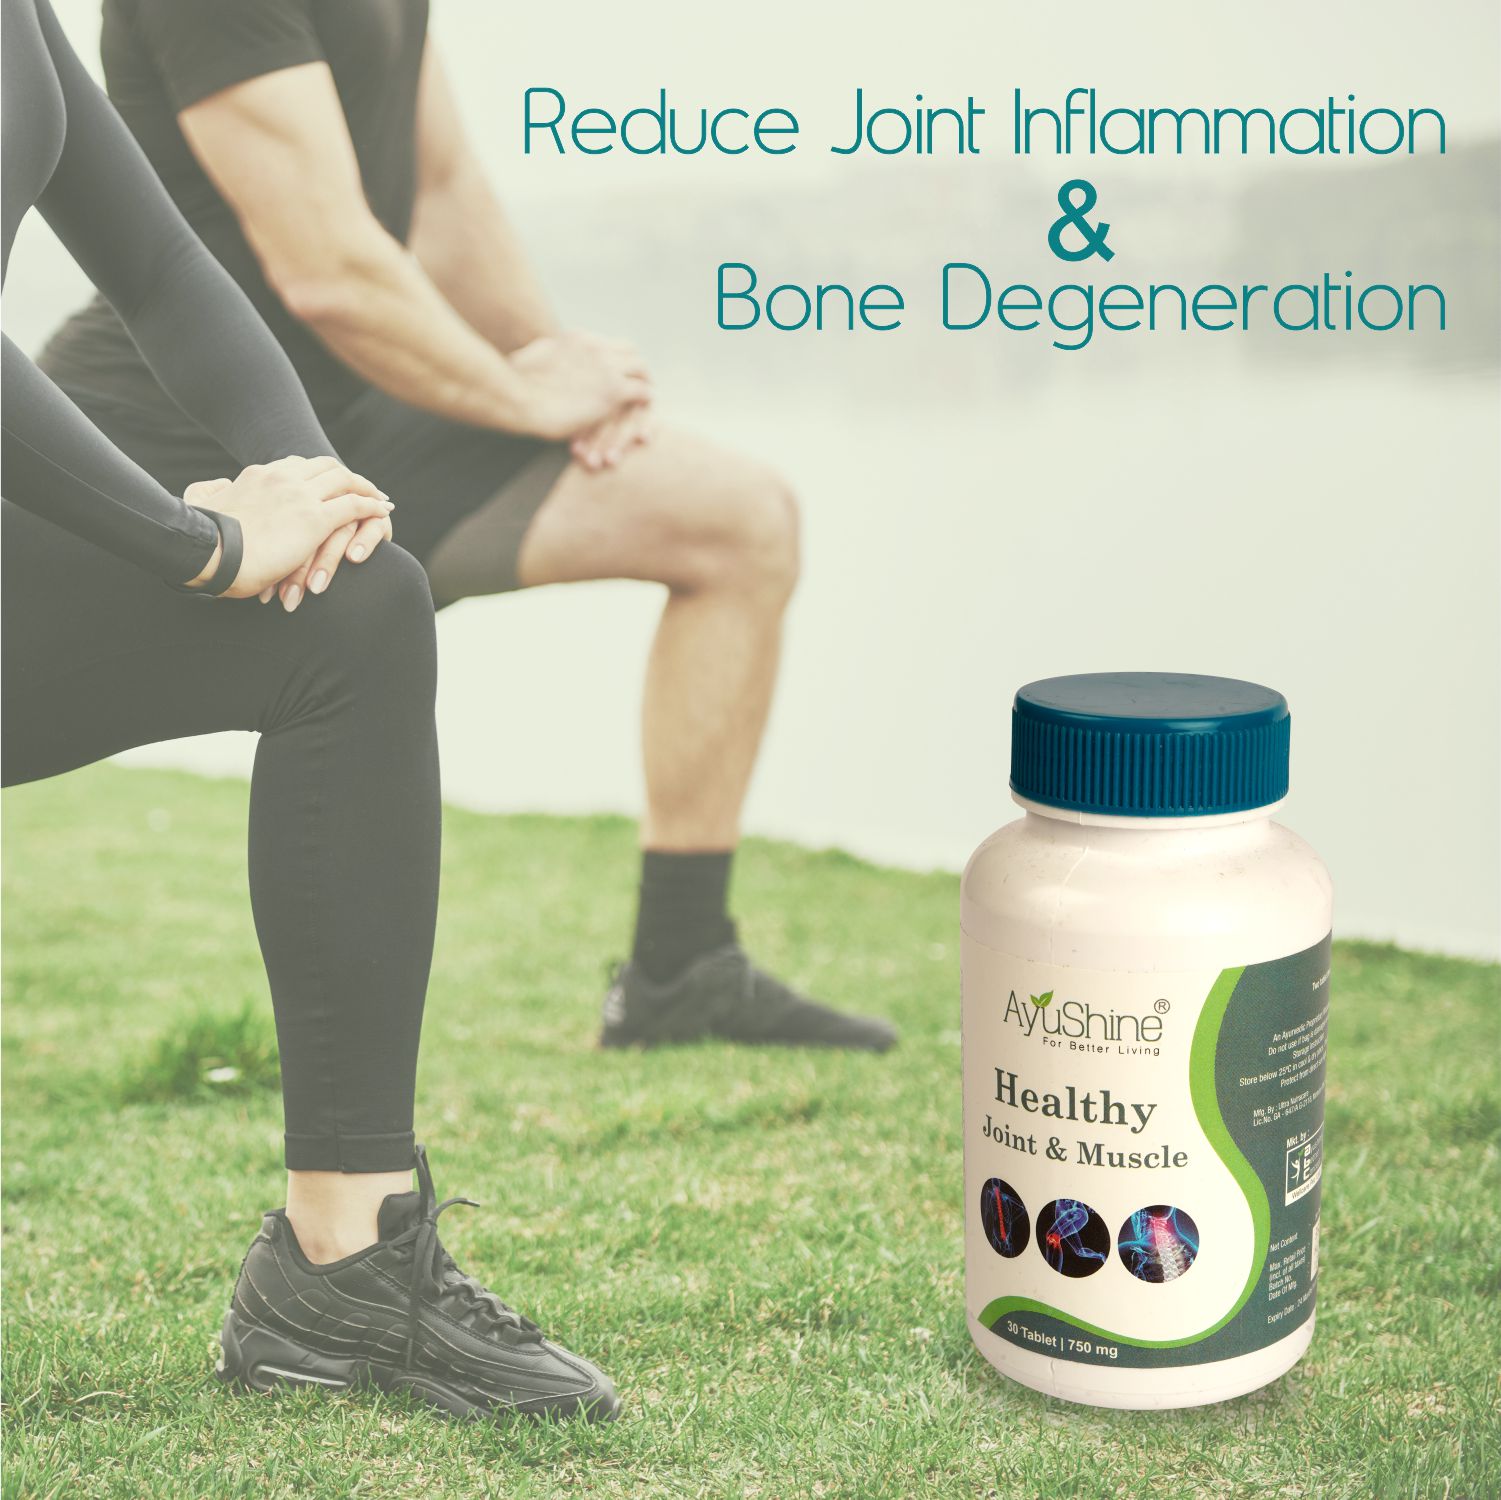 Ayushine Healthy joint and muscle | joint pain | body pain | muscle pain